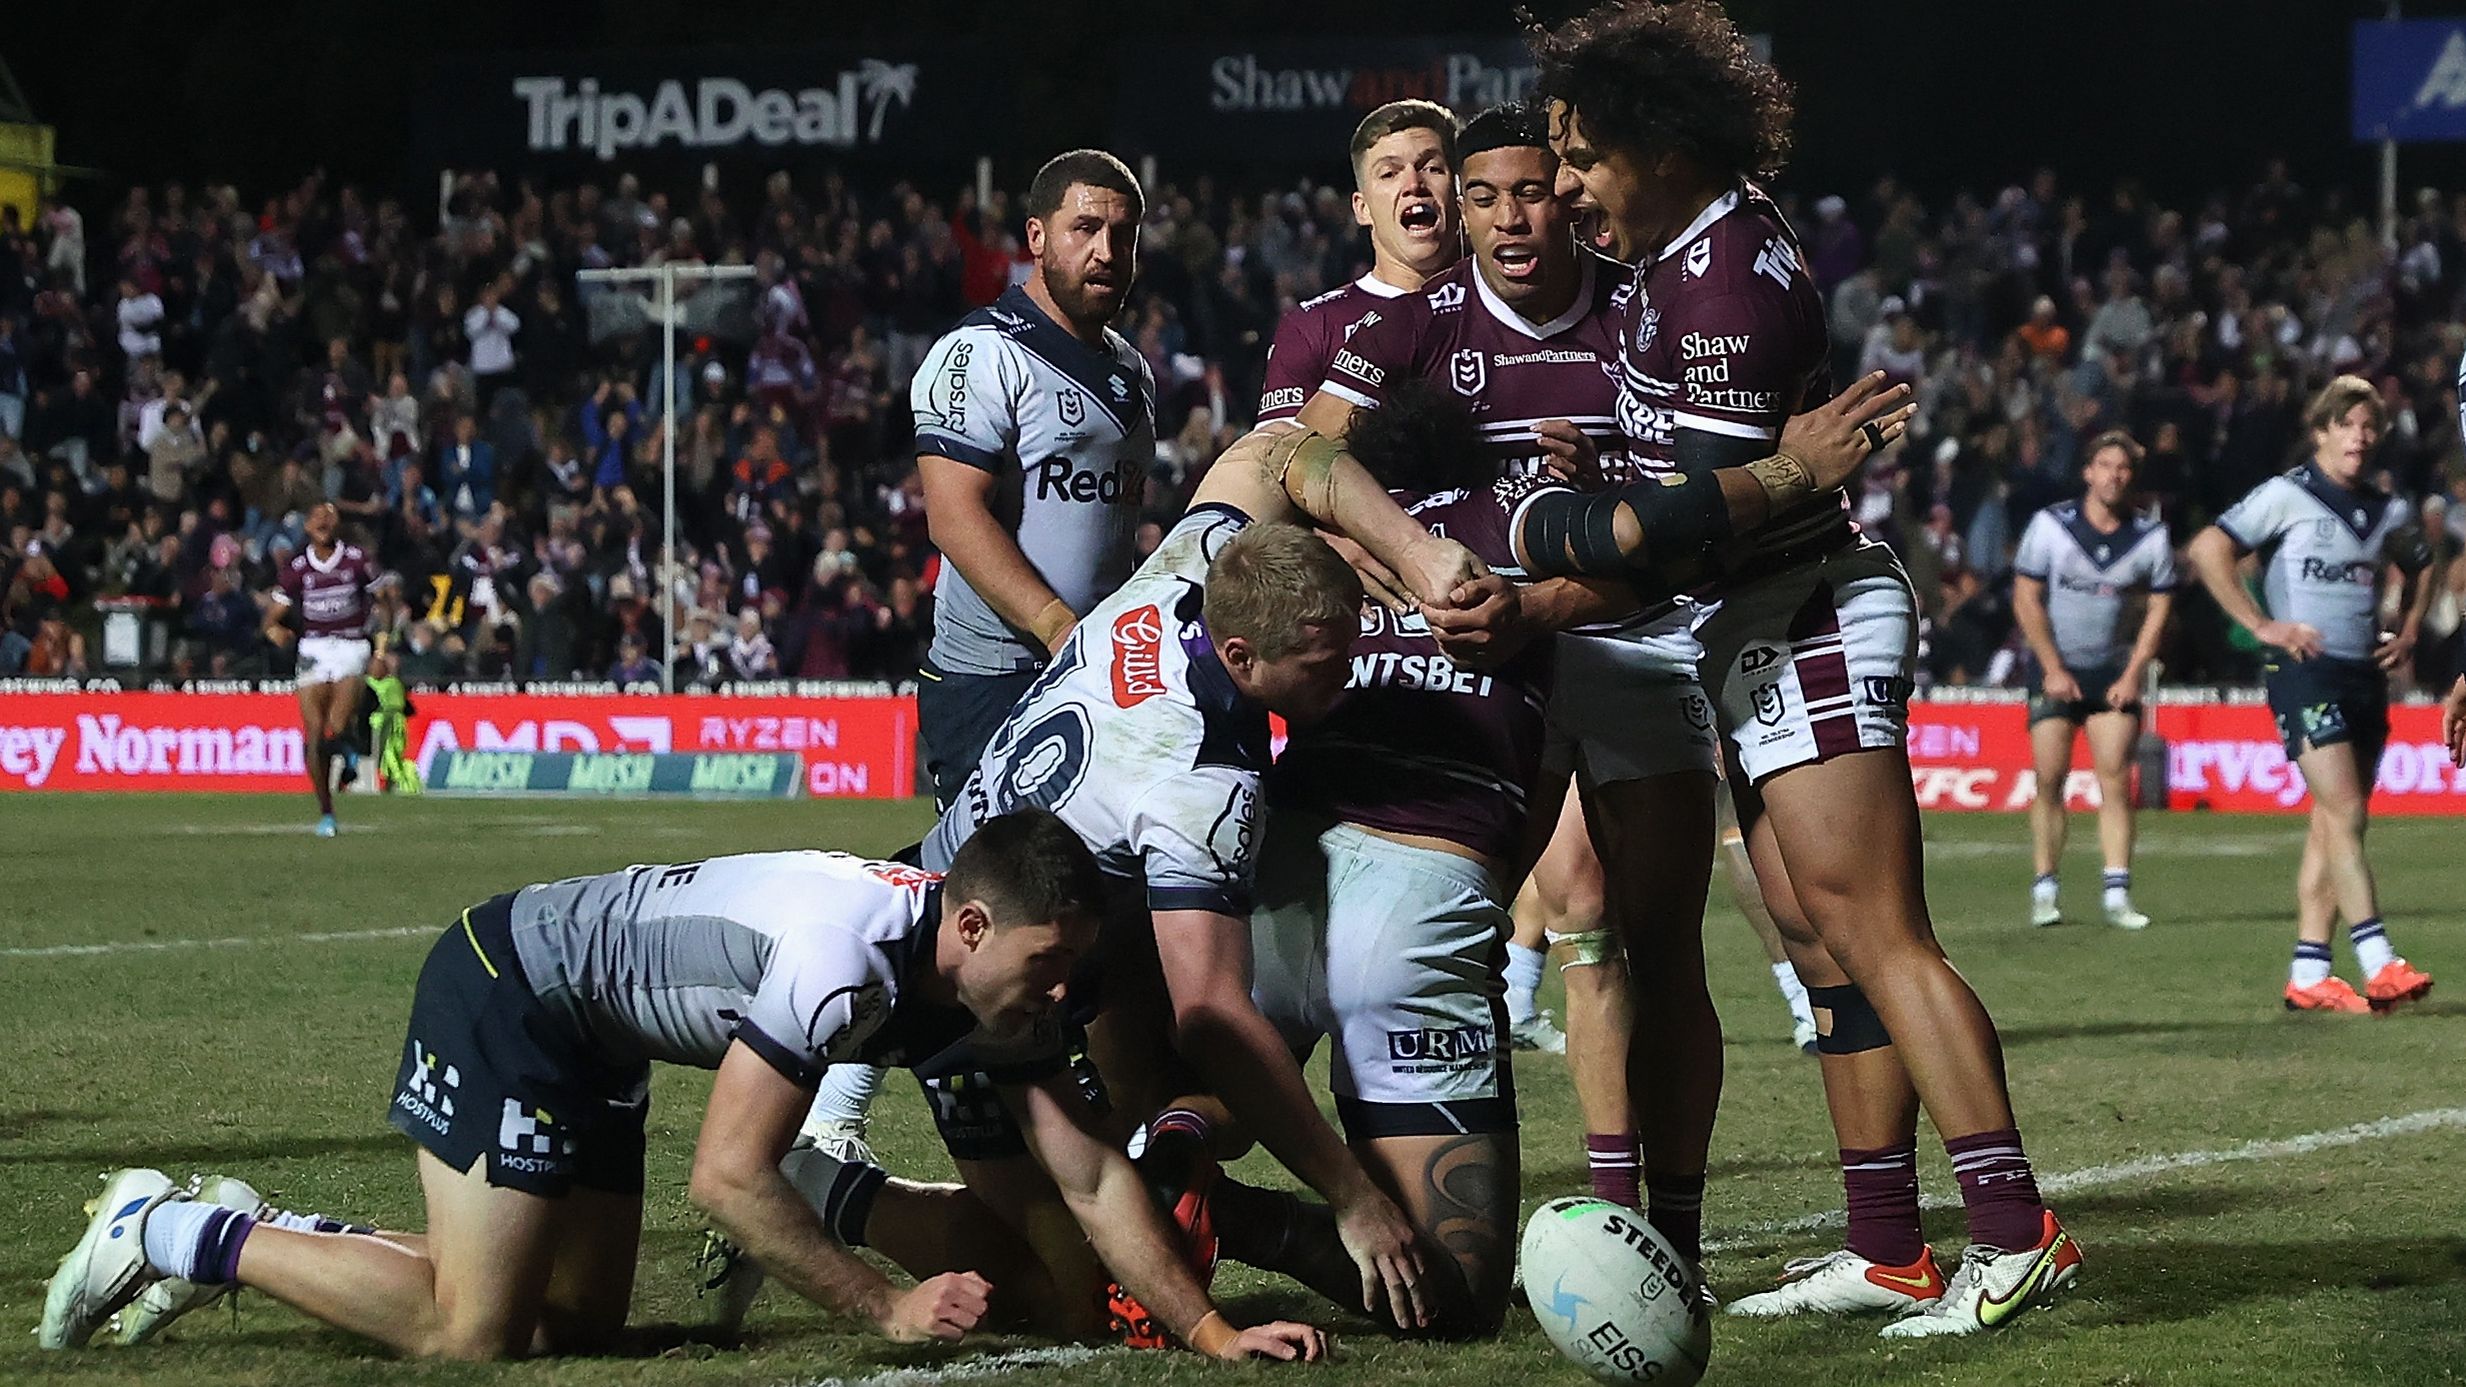 Legend declares 'call an ambulance' as Storm score four tries in five minutes in Manly shocker